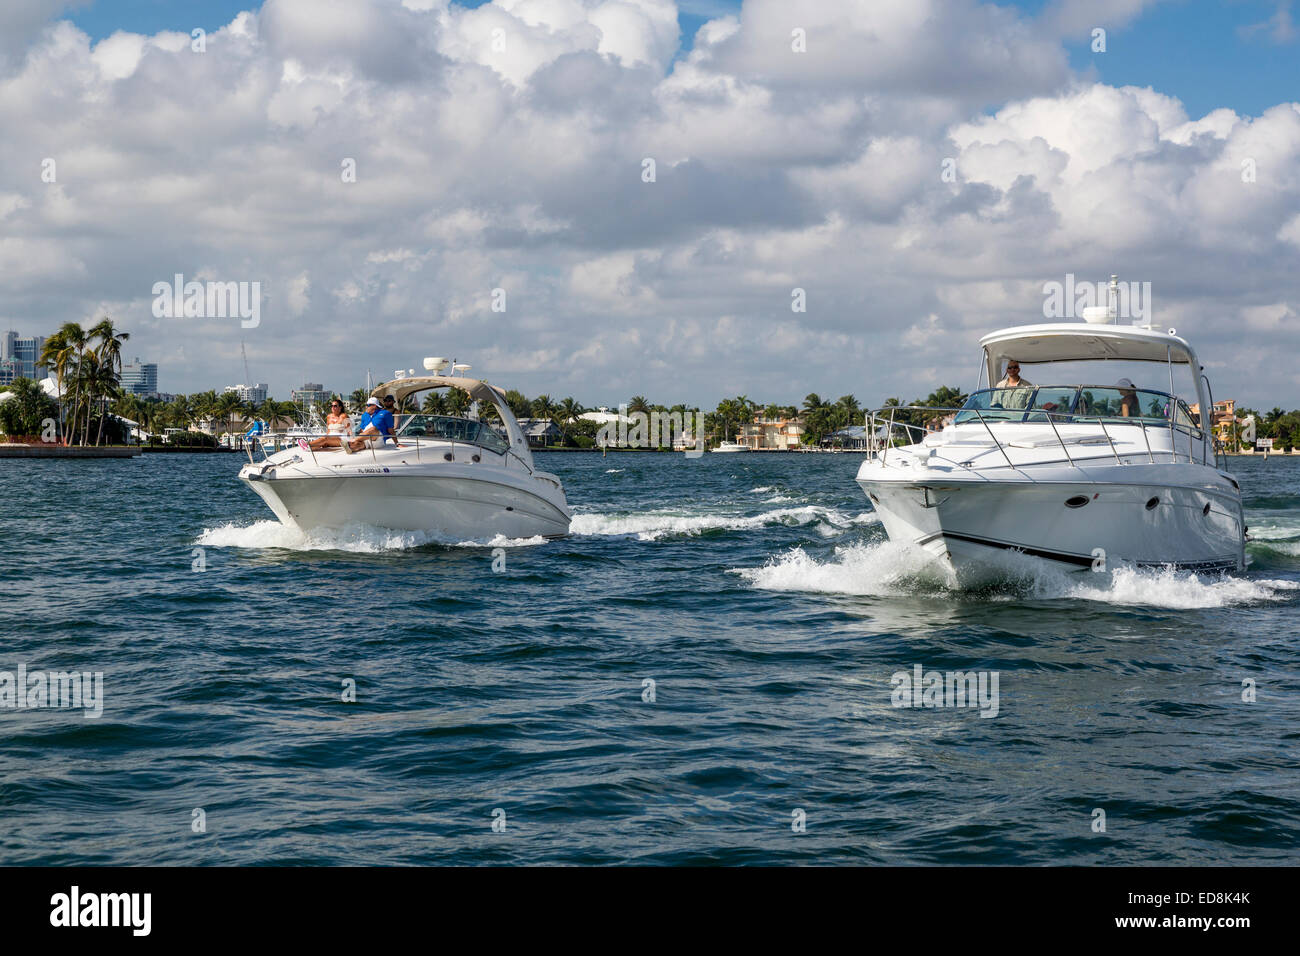 Ft. Lauderdale, Florida.  Sunday Afternoon Pleasure Boats on the Intracoastal Waterway. Stock Photo